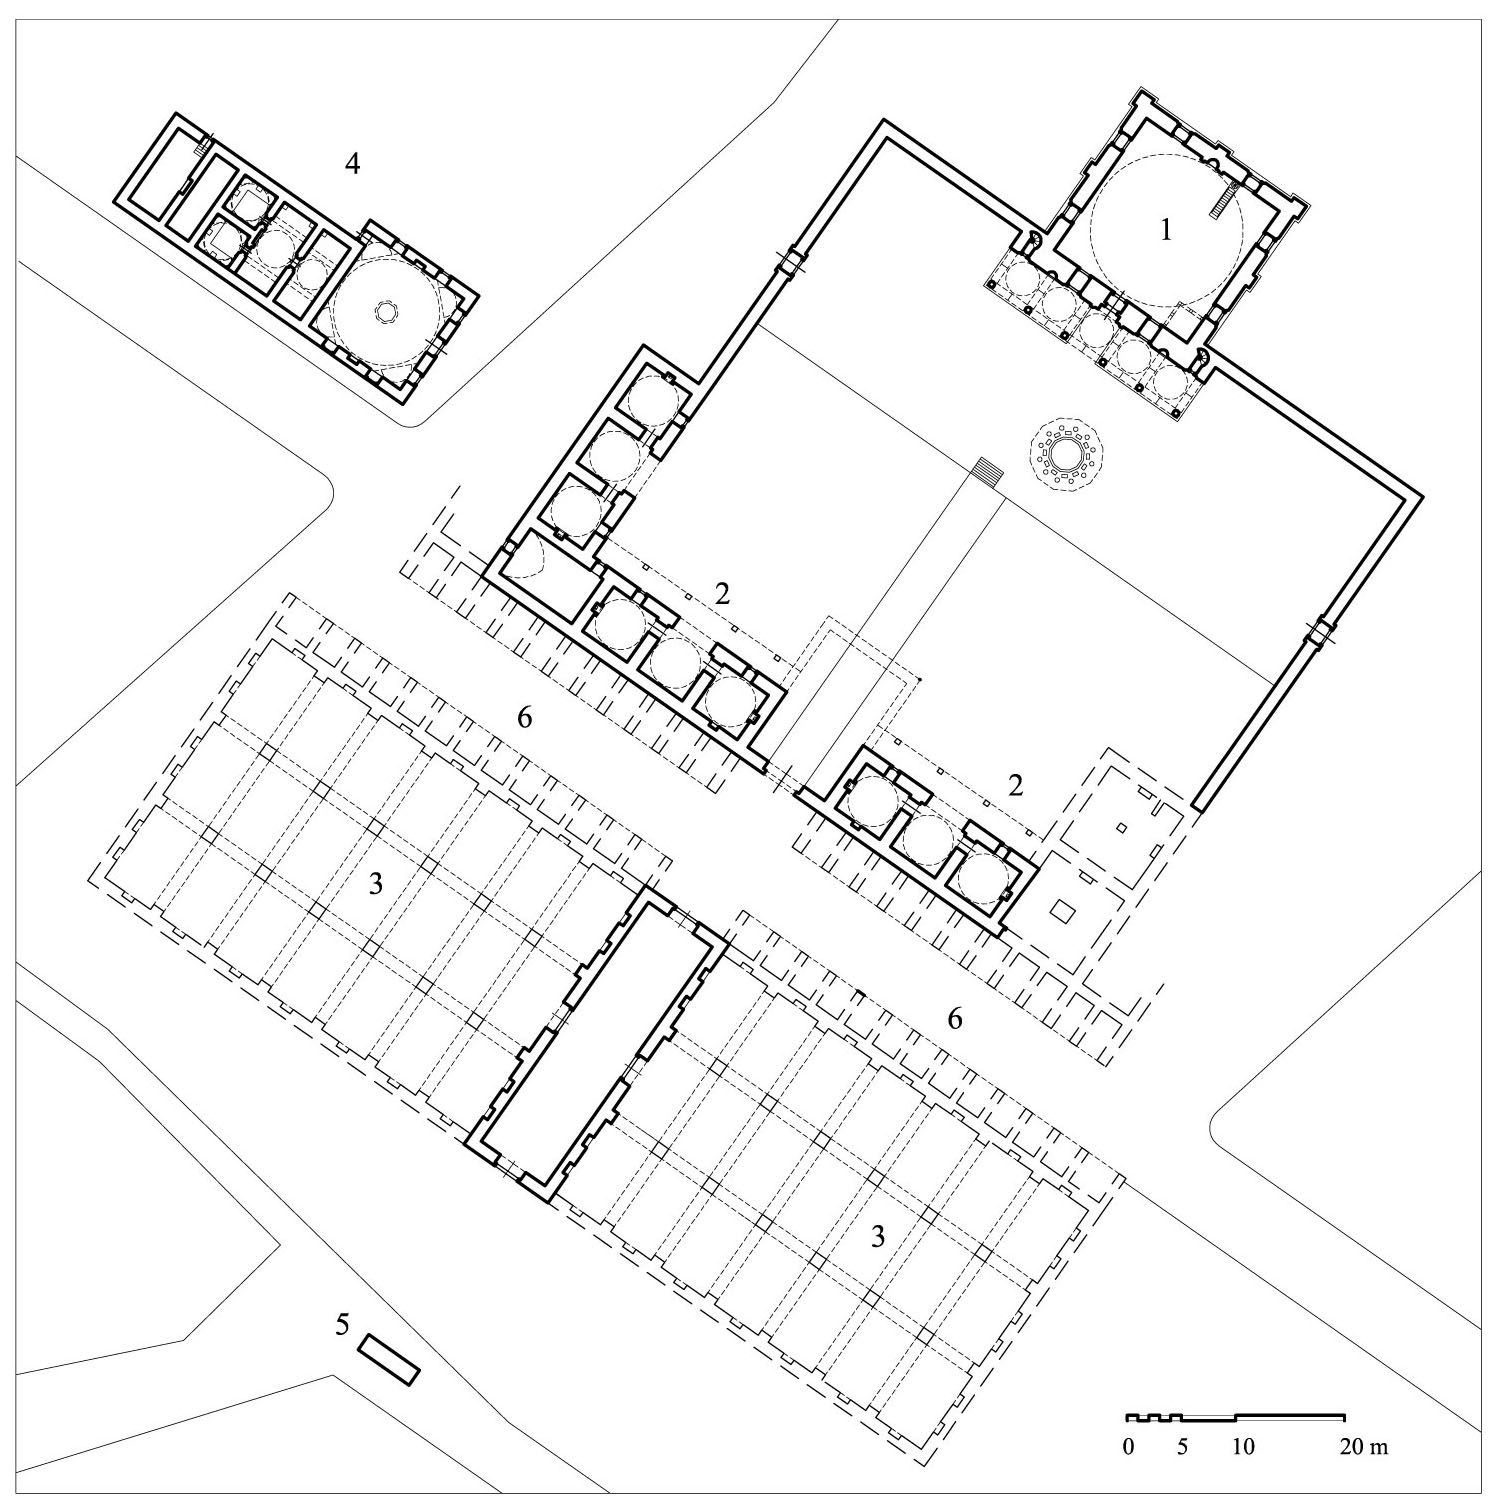 Karapınar Selimiye Külliyesi - Floor plan of the complex showing (1) mosque, (2) excavated remains of guestrooms and hospice, (3) double caravanserai (hypothetical reconstruction), (4) bathhouse, (5) public fountain, (6) bazaar (<i>arasta</i>) with excavated shop foundations. DWG file in AutoCAD 2000 format. Click the download button to download a zipped file containing the .dwg file.